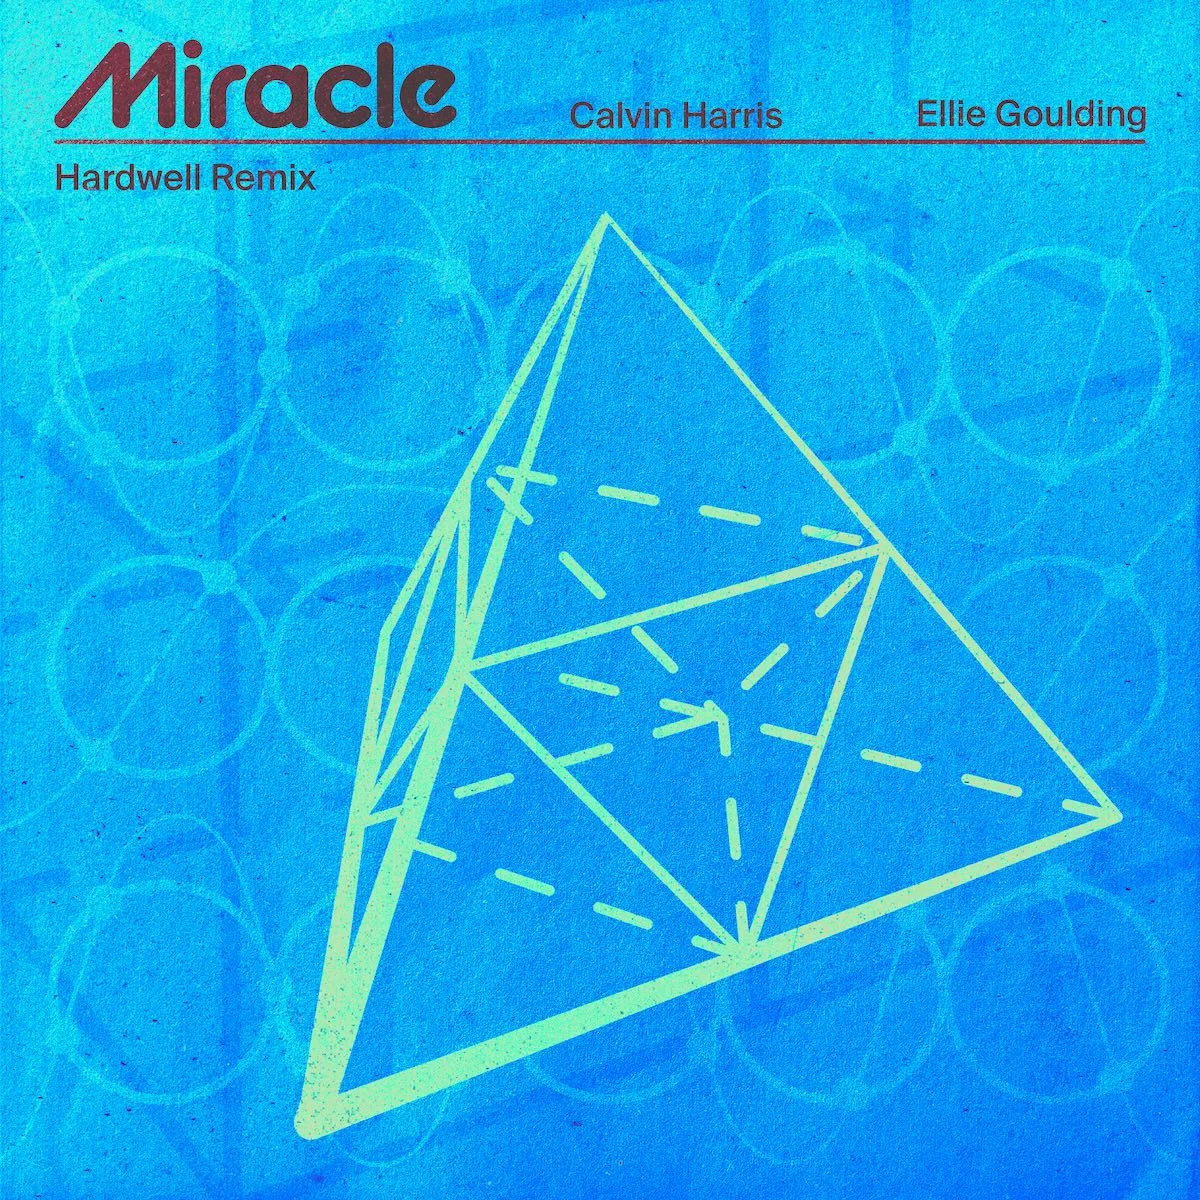 Miracle – (with Ellie Goulding) [Hardwell Remix] – Calvin Harris & Ellie Goulding & Hardwell